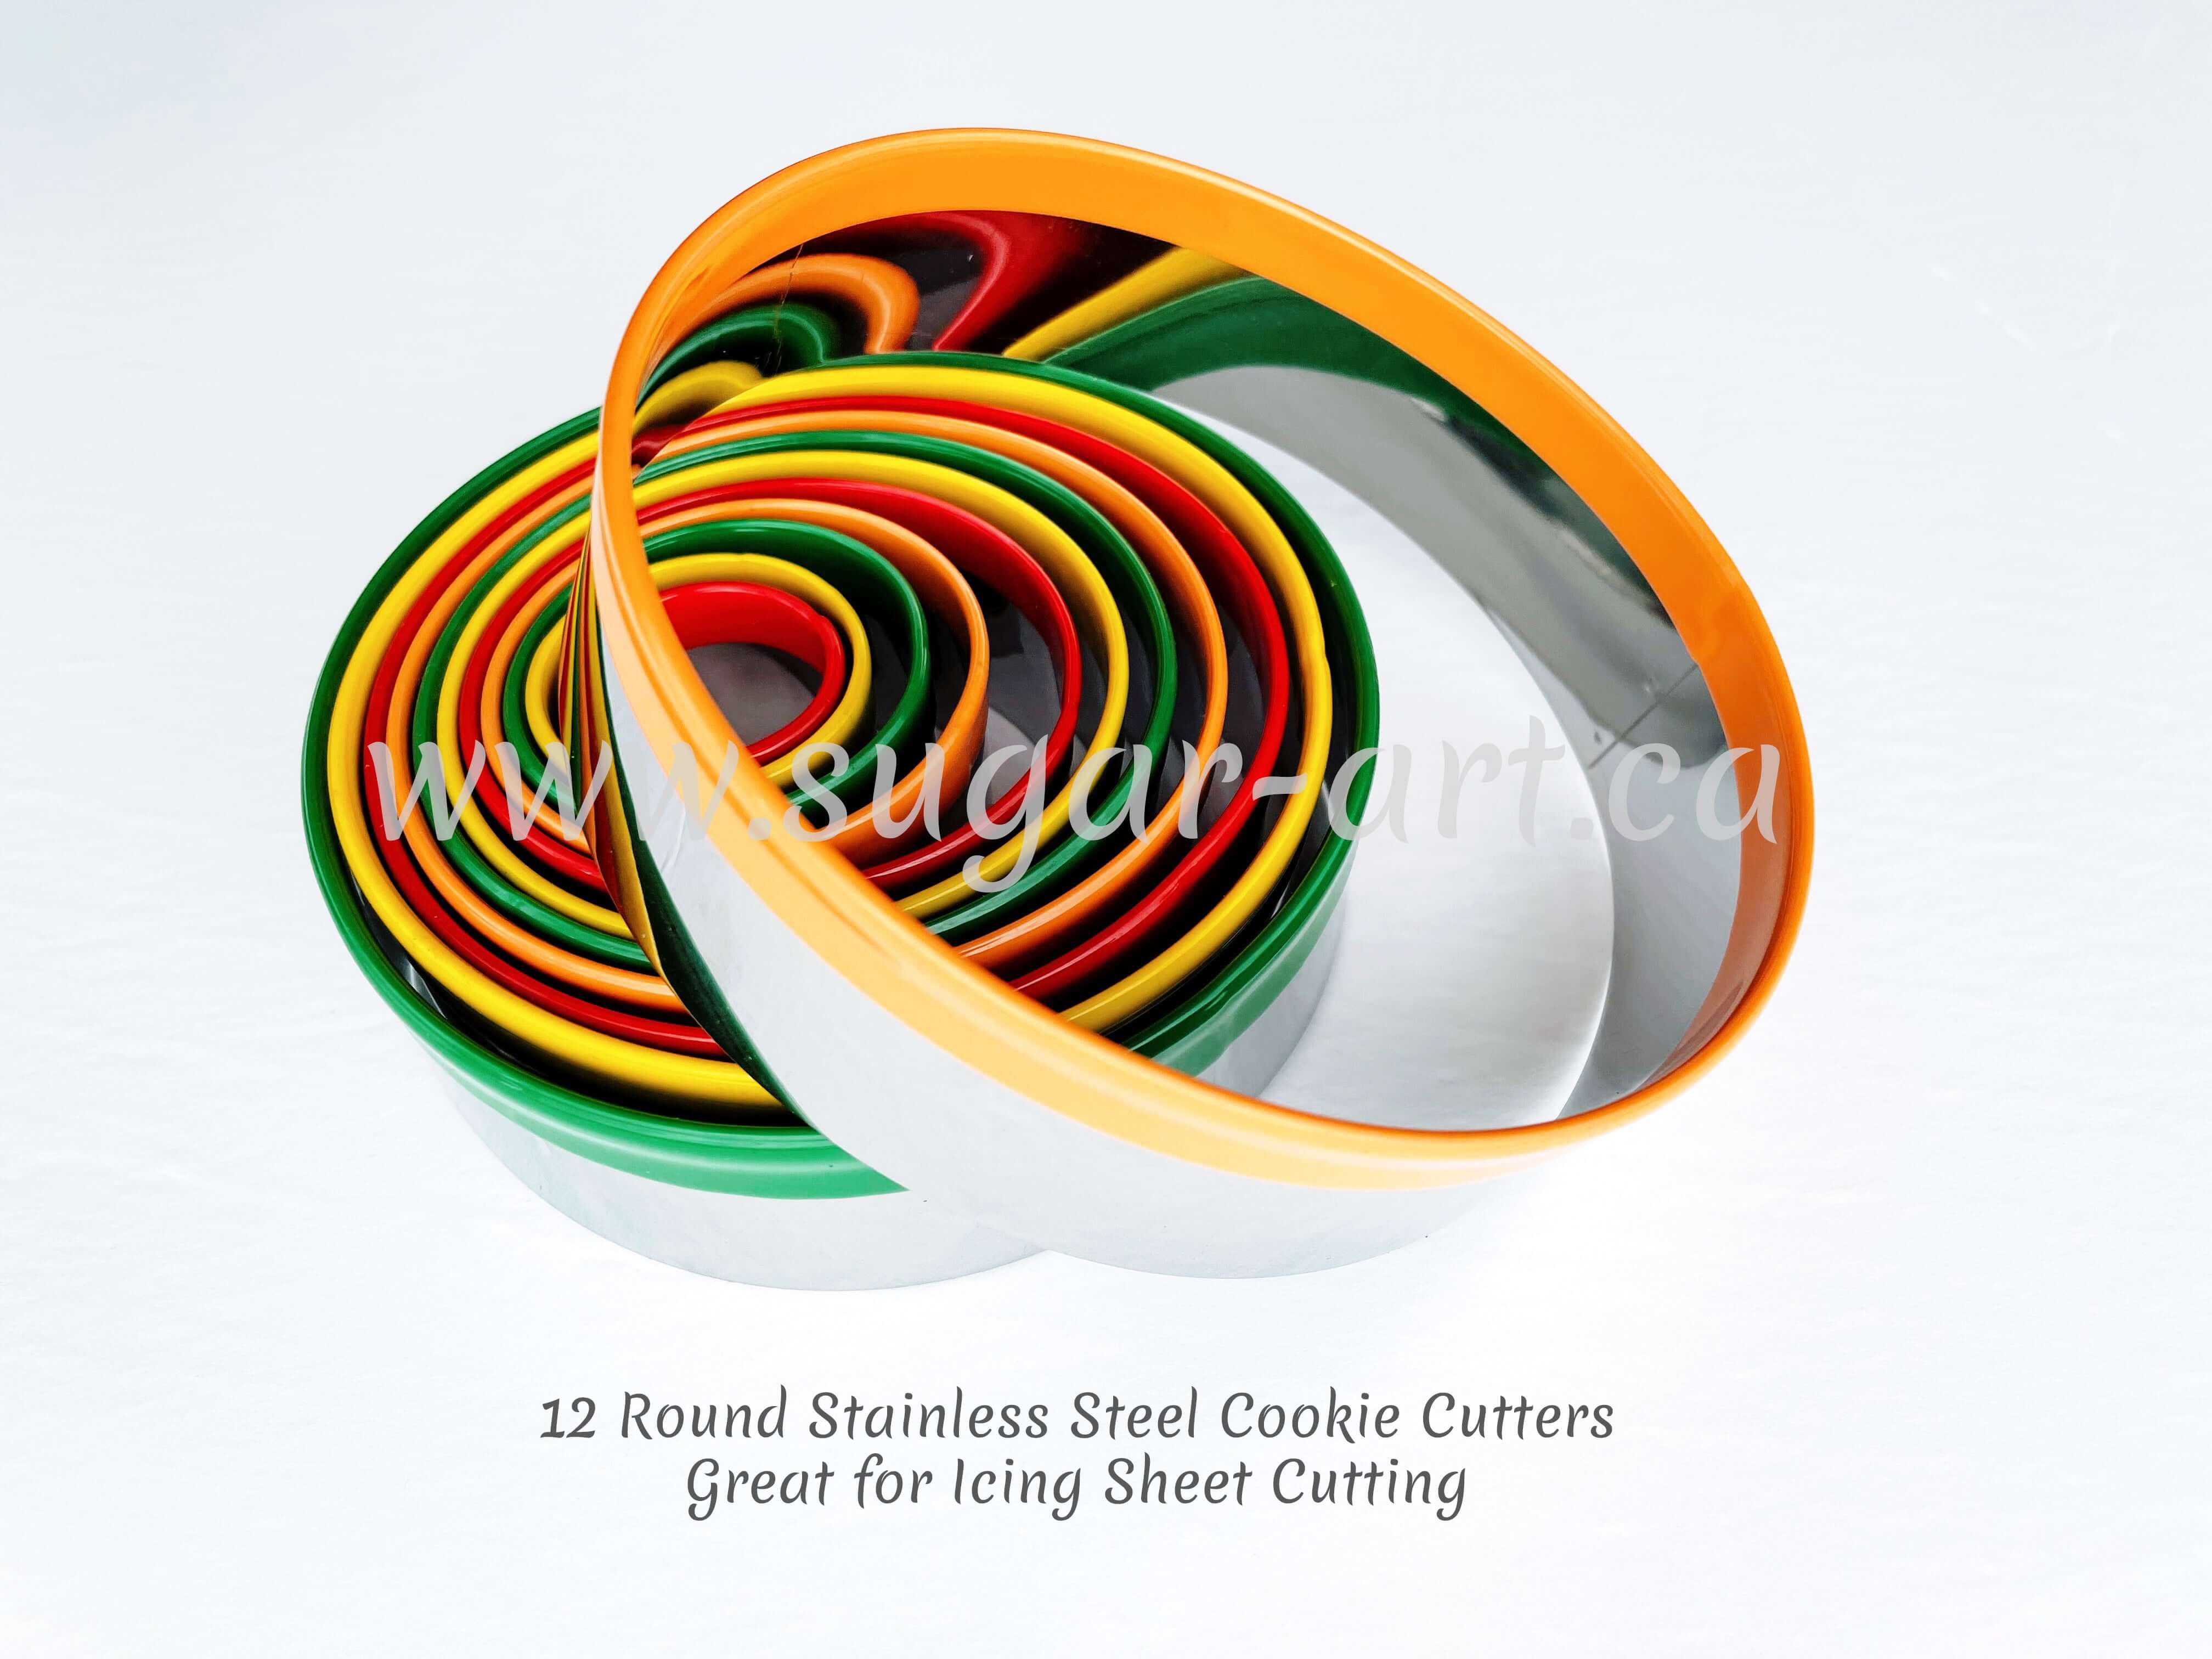 12 Round Stainless Steel Cookie Cutters - Great for Icing Sheet Cutting - BSUPP030.